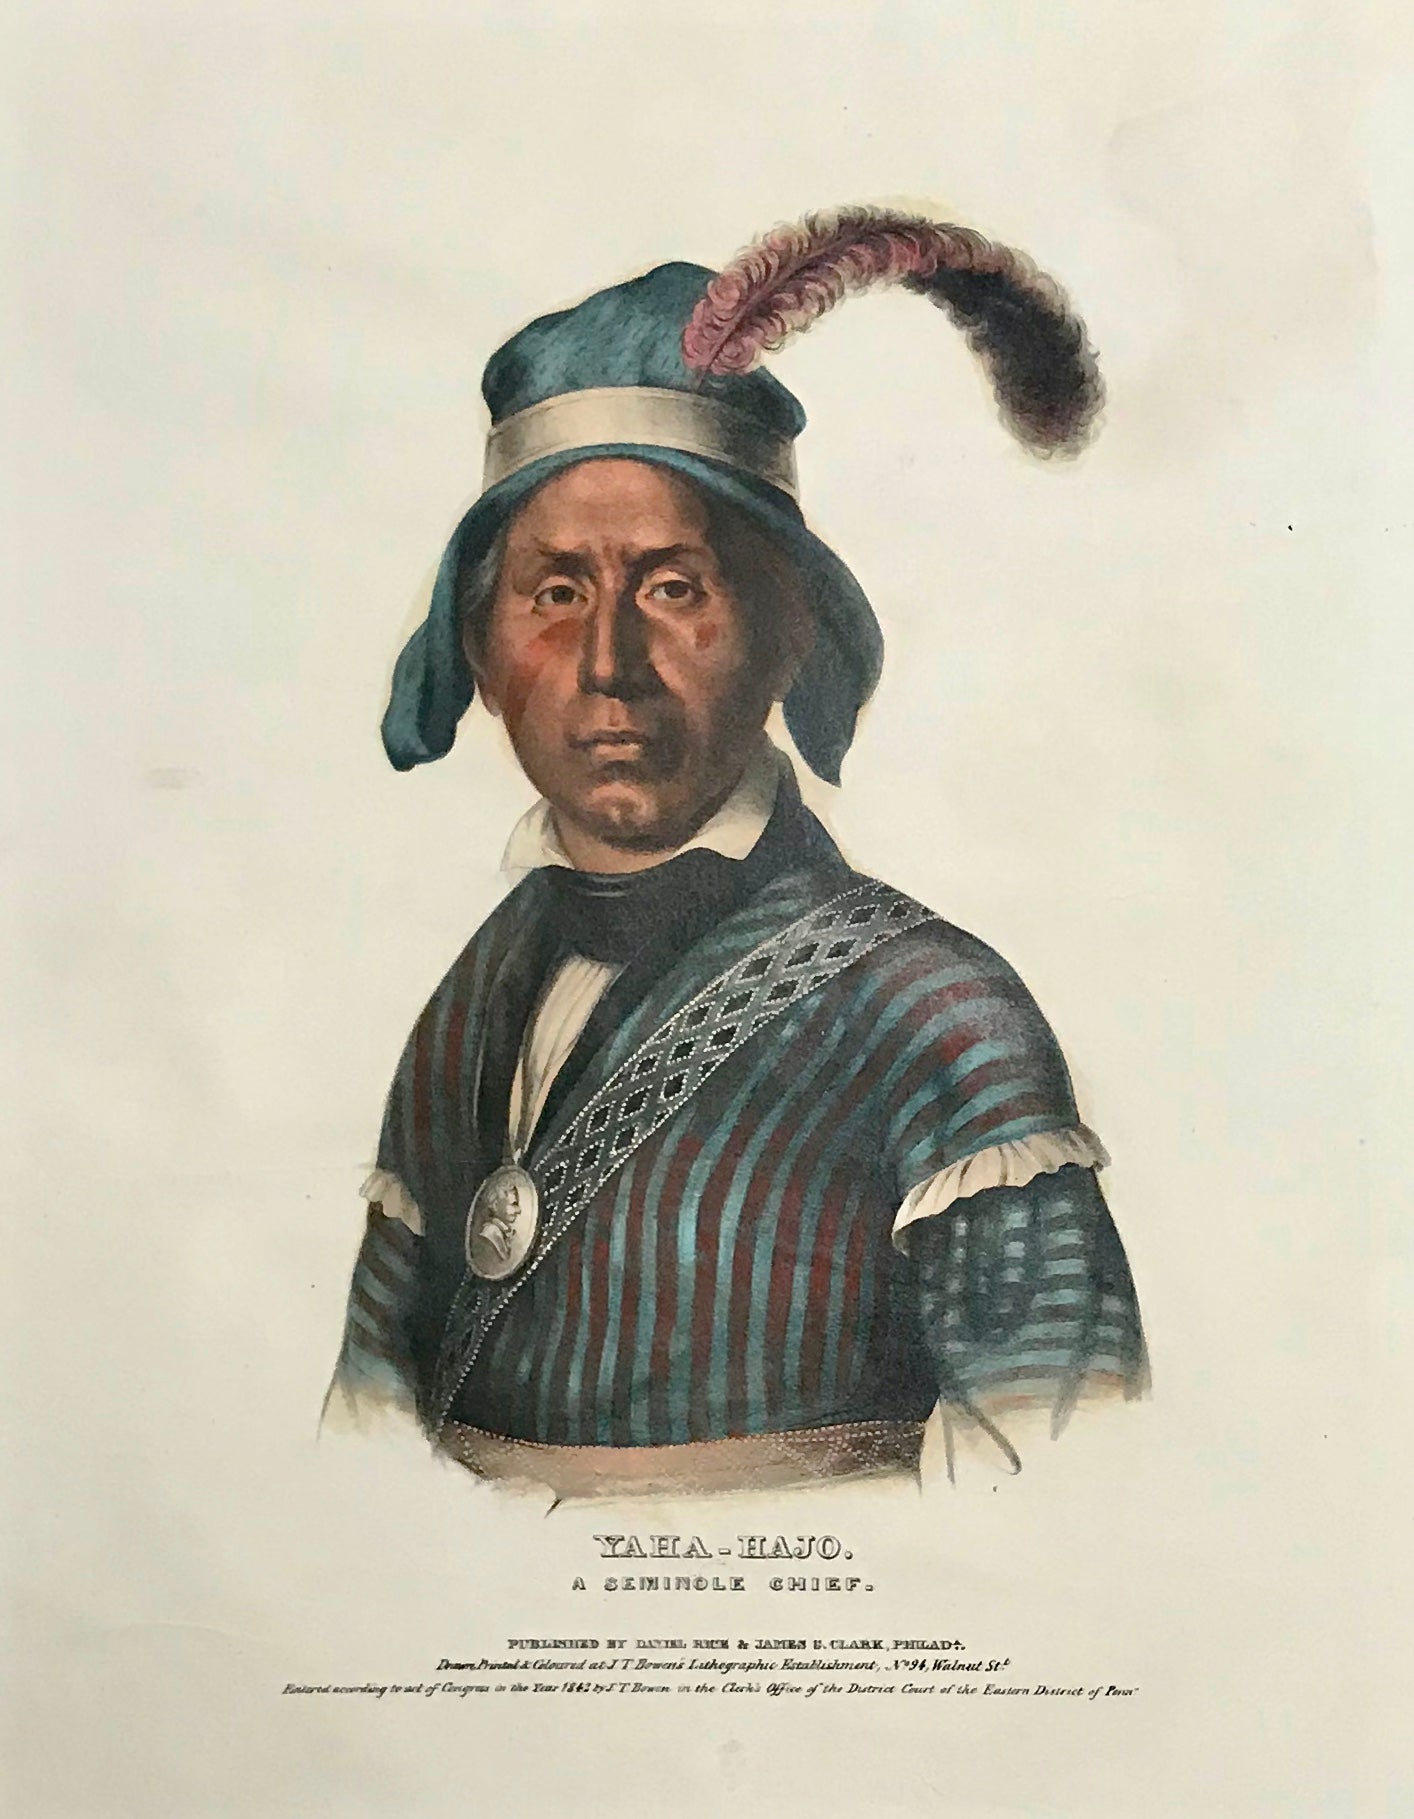 "Yaha-Hajo. A Seminole Chief" Lithograph. Original hand coloring Painting by Charles Bird King (1785-1862) Published in: "History of the Indian Tribes of North America" Authors: Thomas Loraine McKenny (1785-1859) and James Hall (1793-1868)